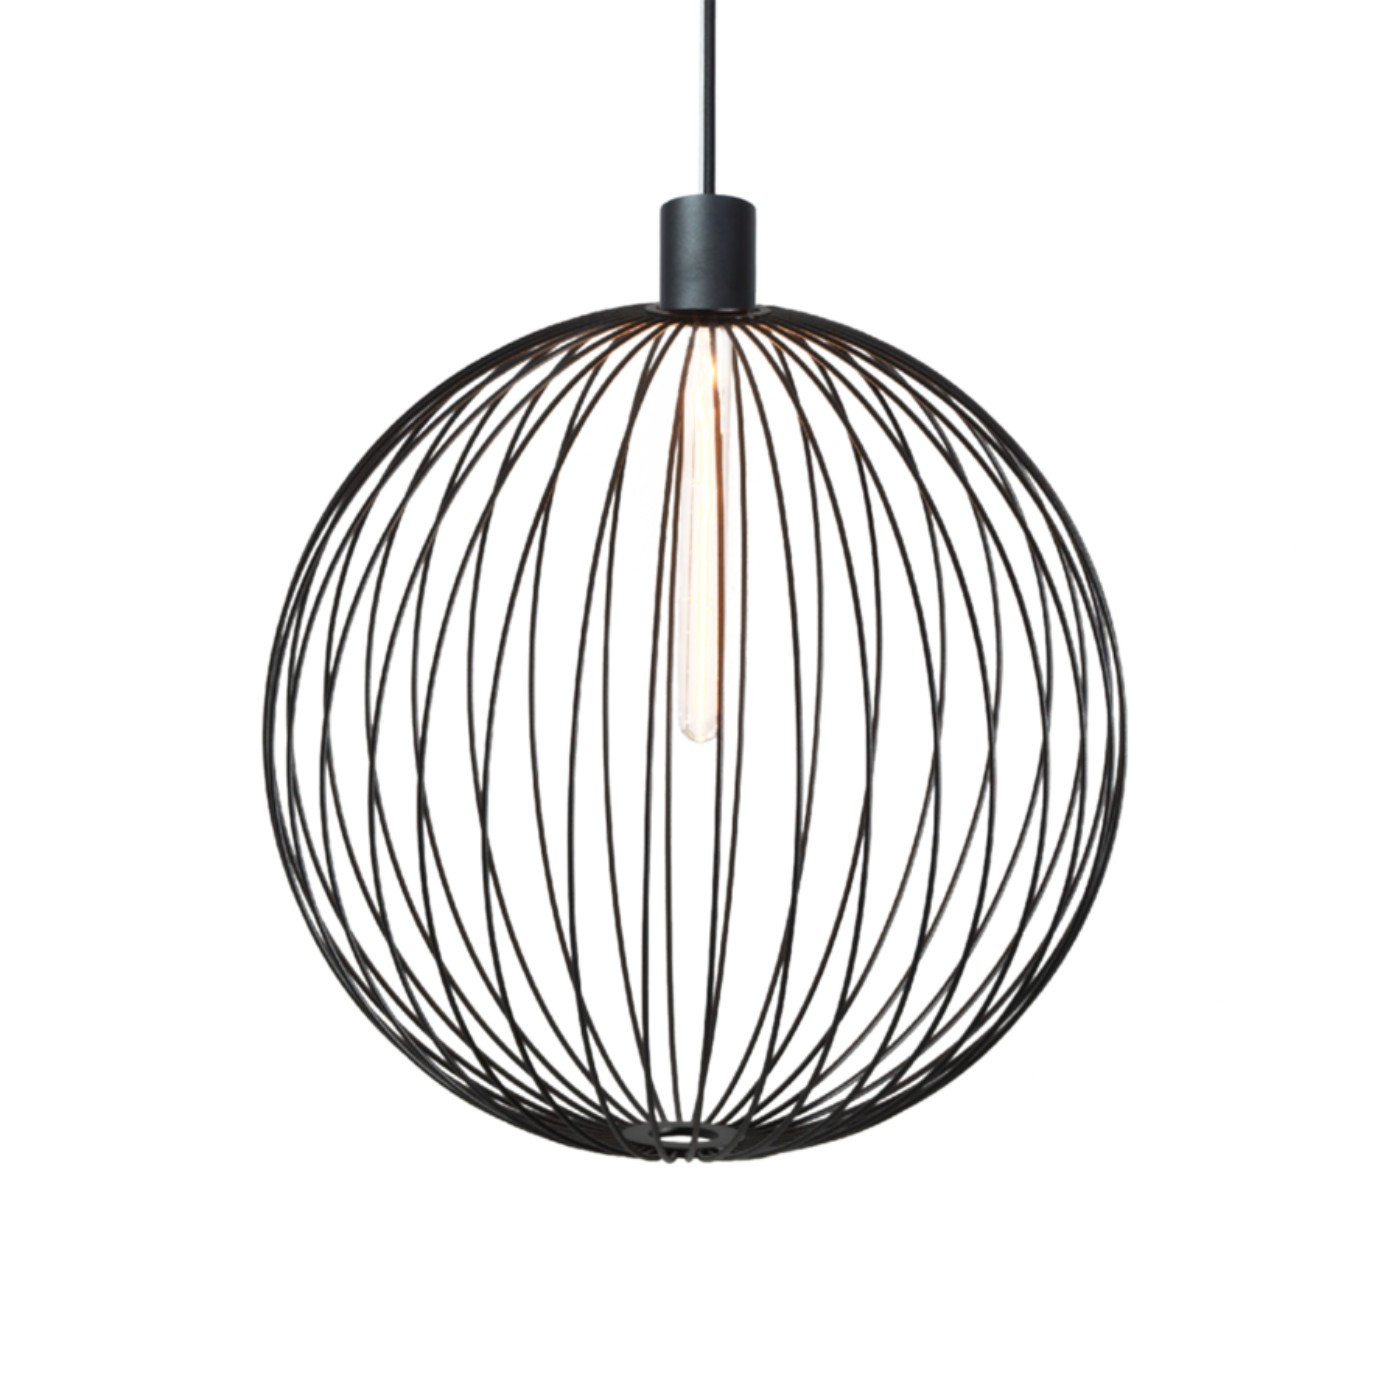 Wever & Ducré Wiro Suspended Globe 5.0